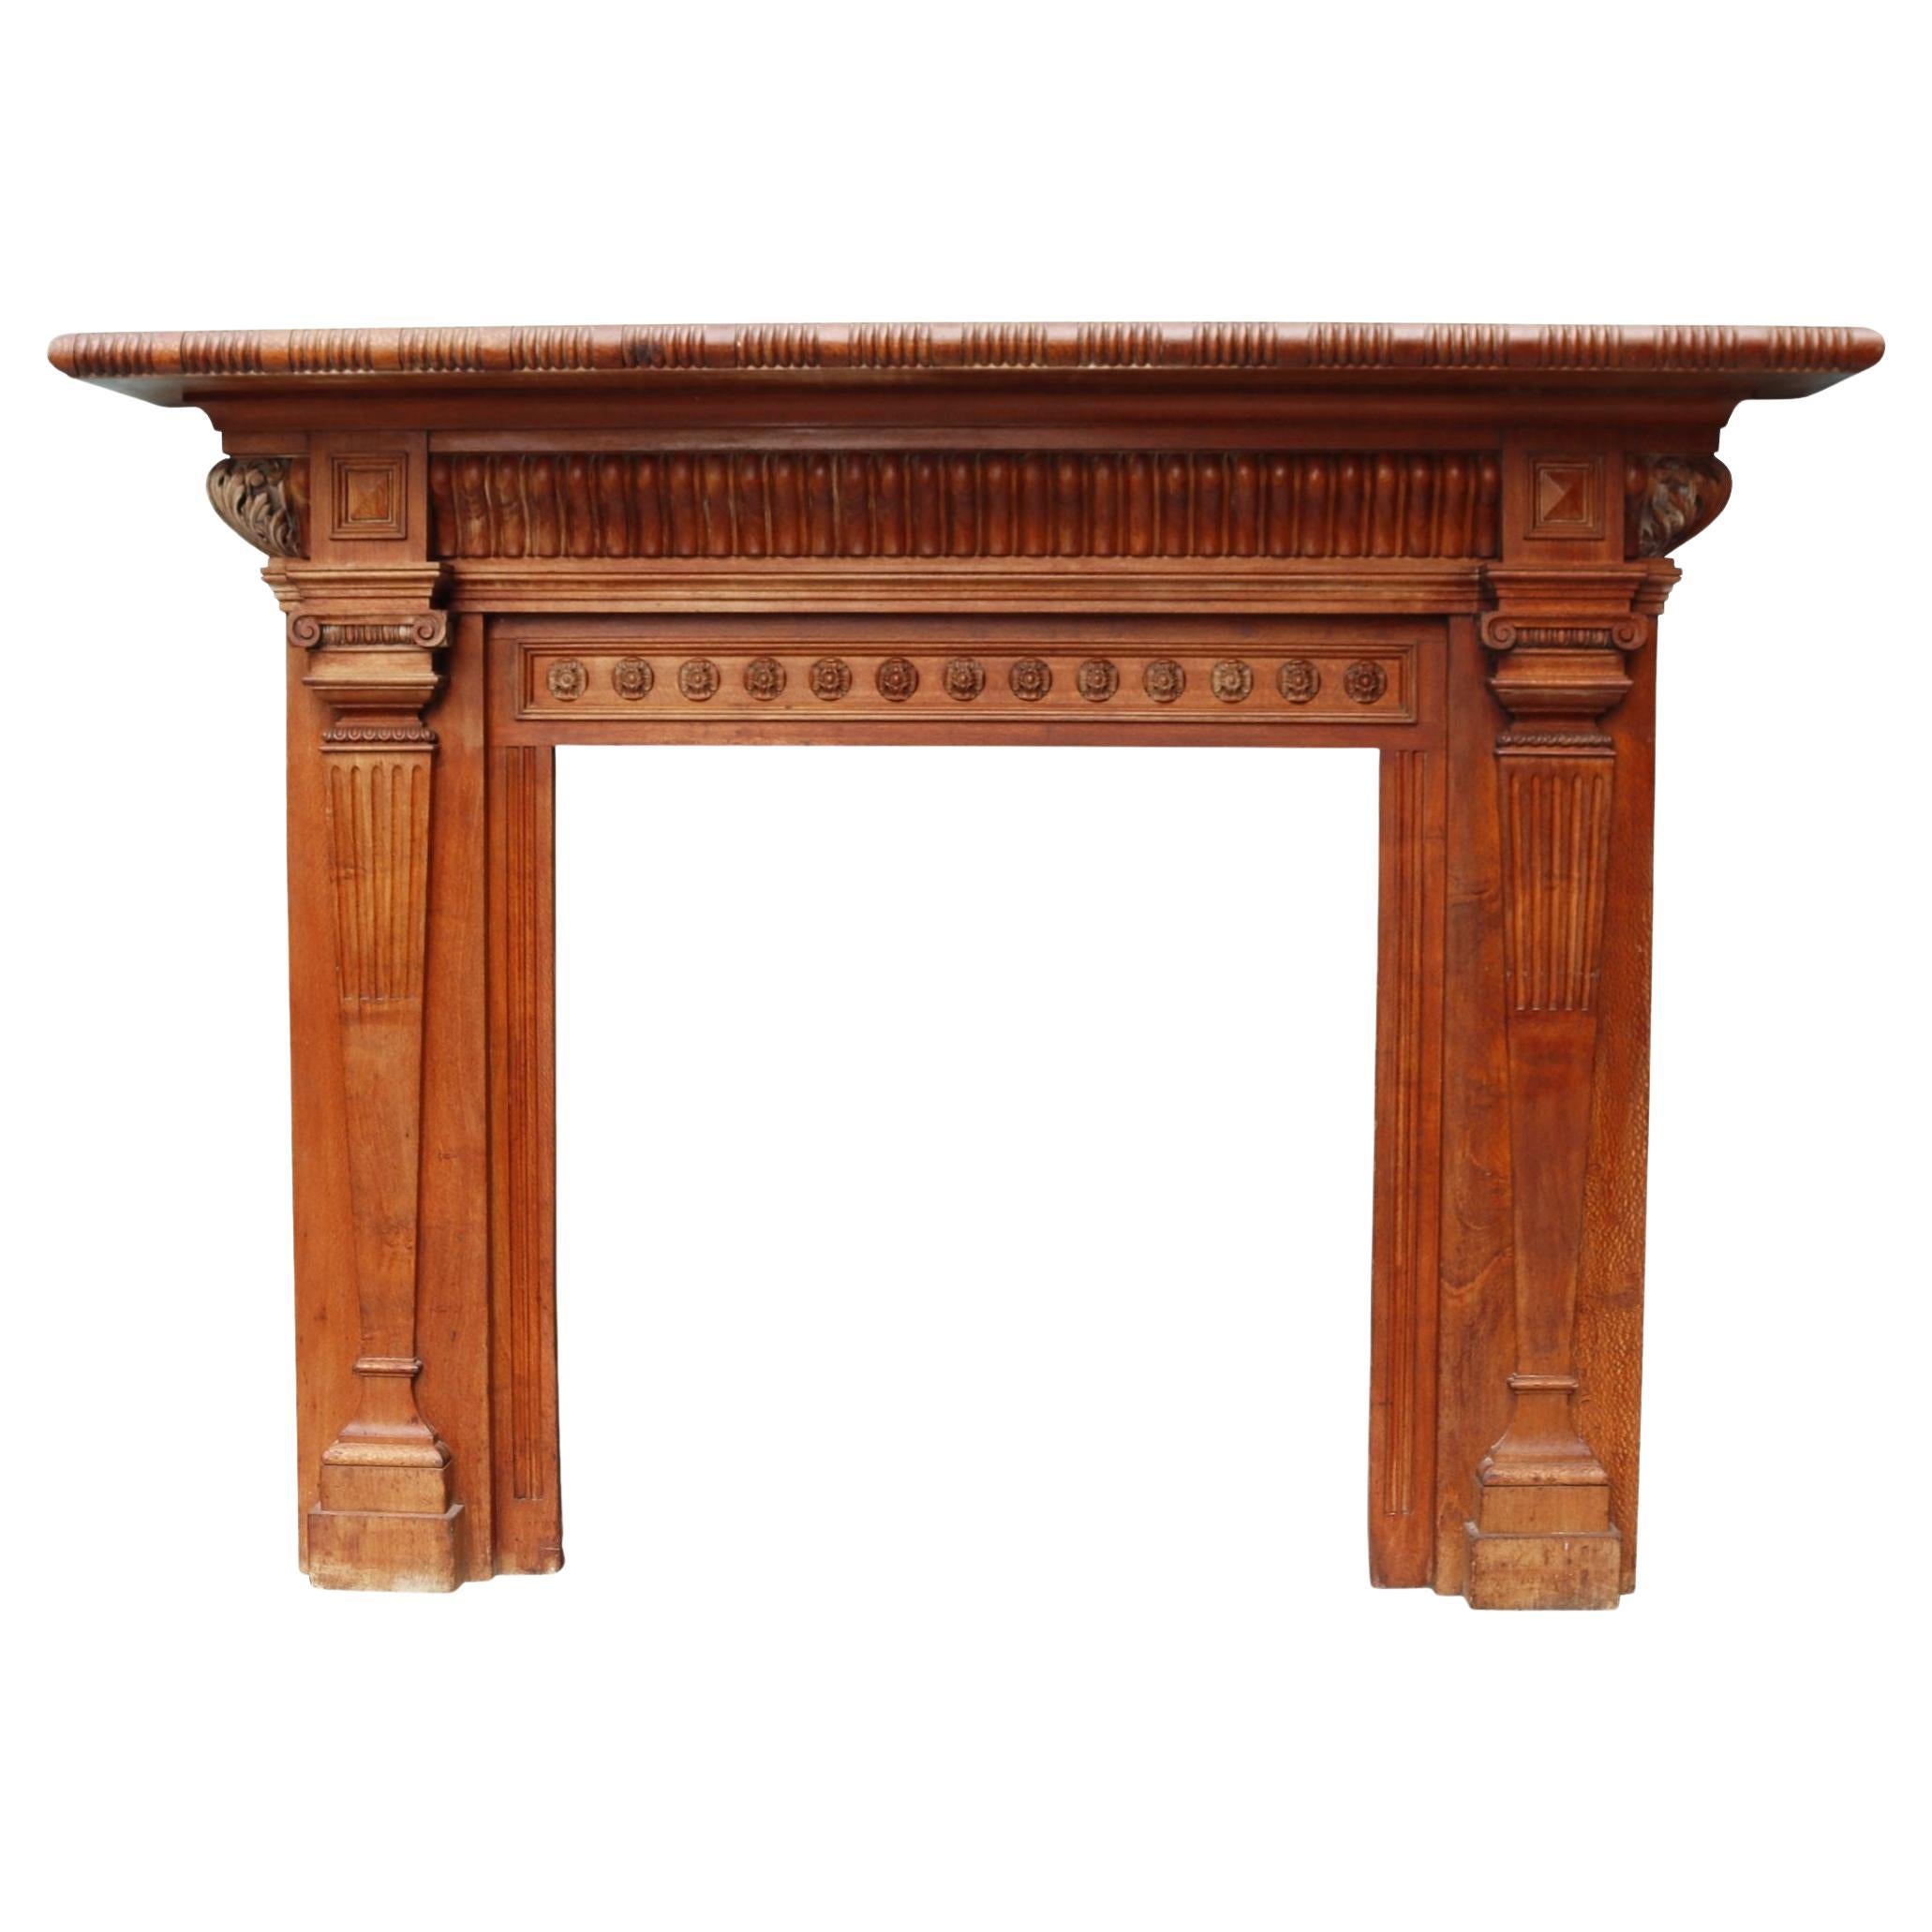 Victorian Style Carved Oak Fireplace For Sale